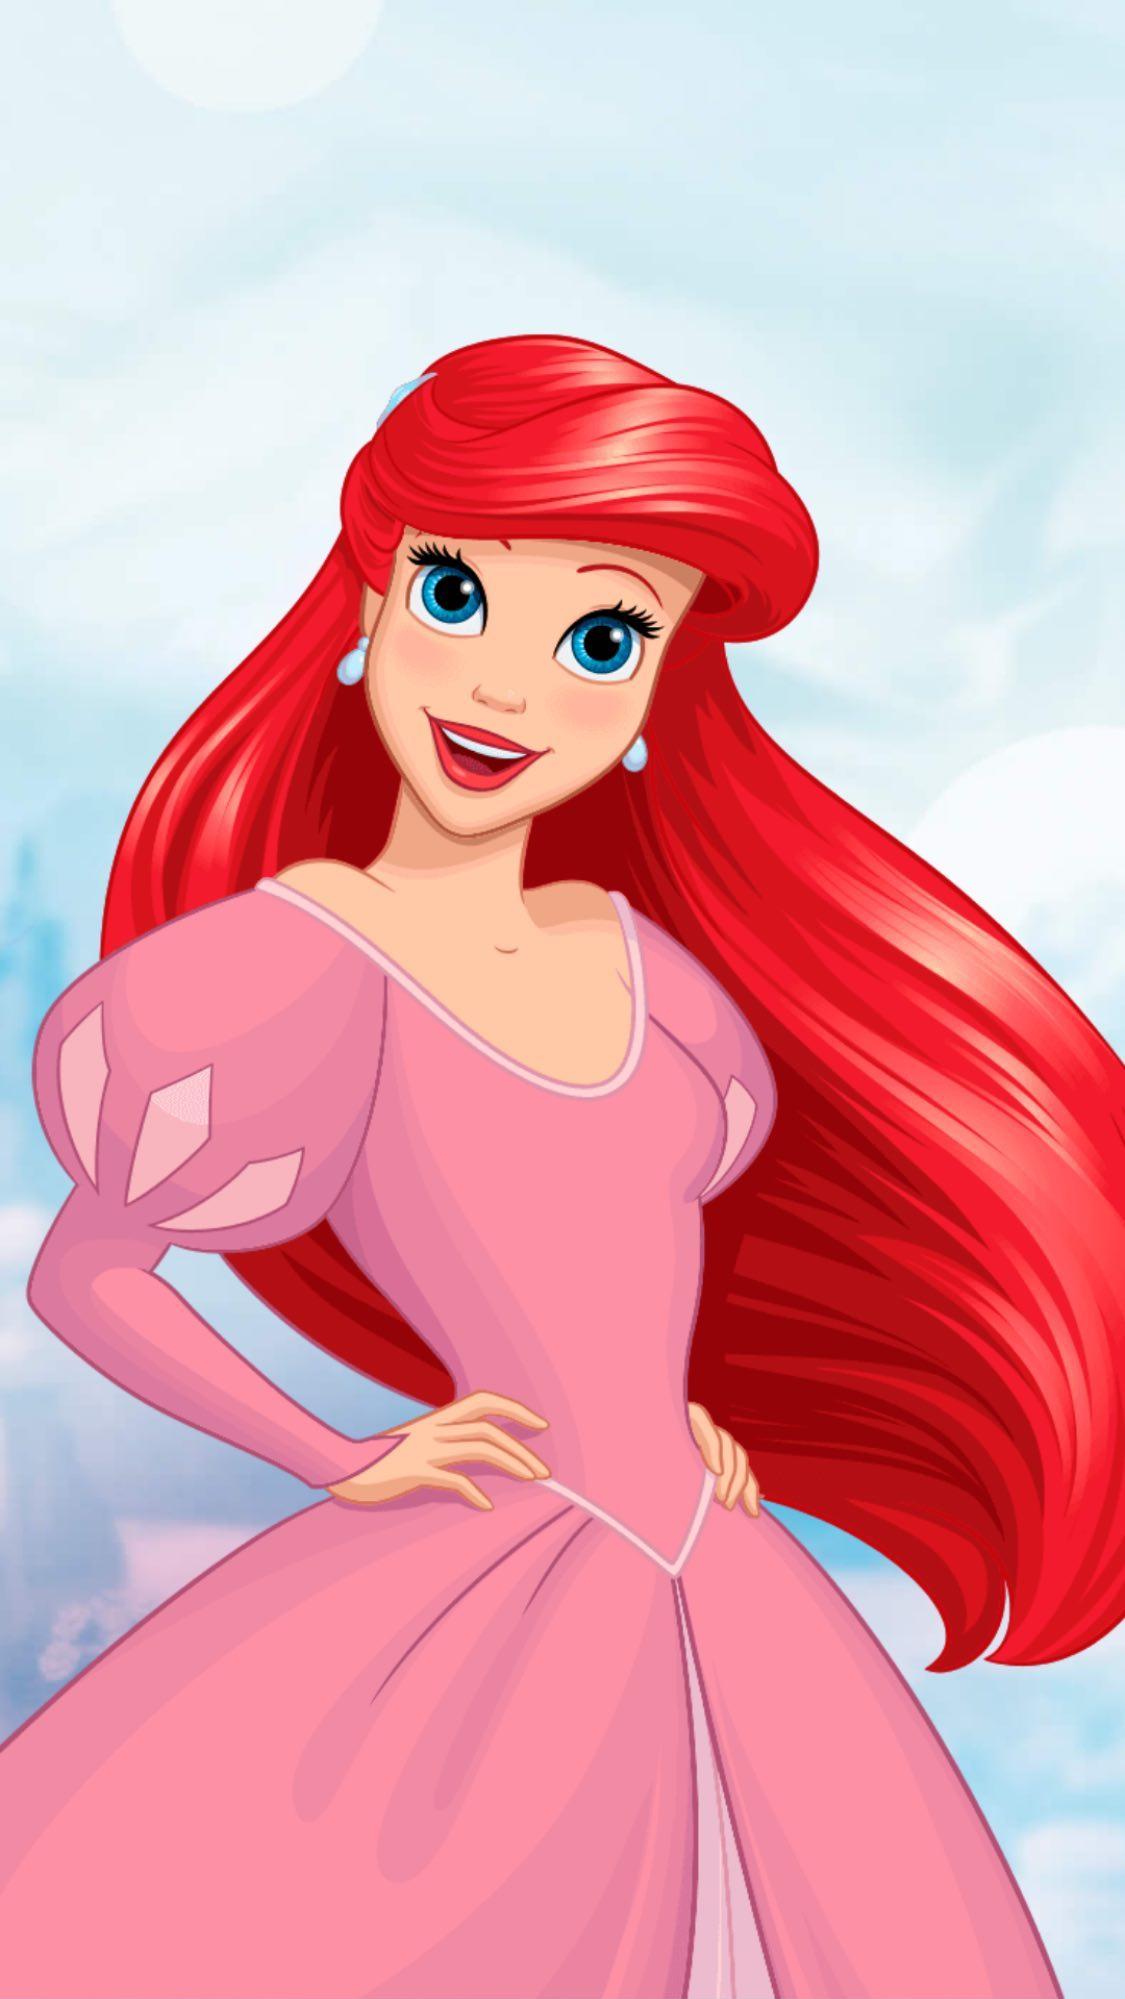 Disney Princess Mobile Wallpaper Collection Youloveit